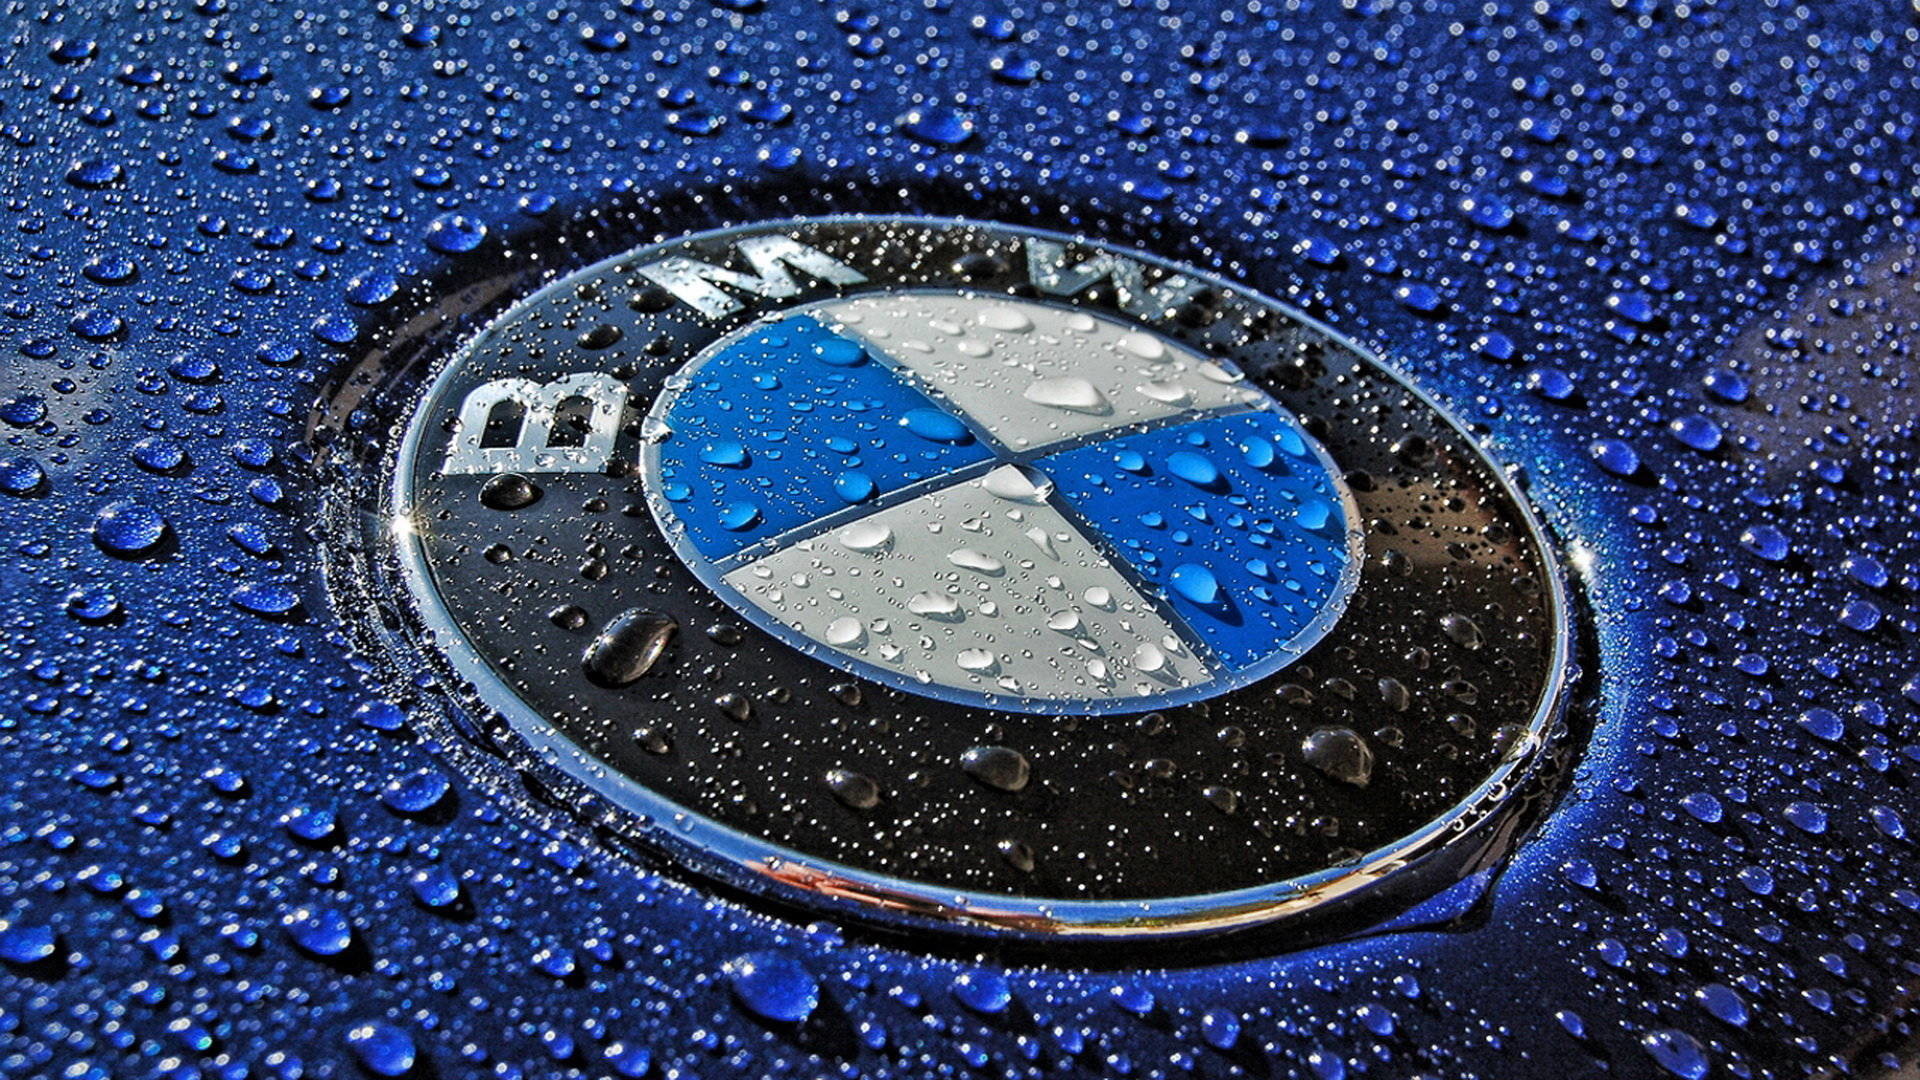 1920x1080 Logos Wallpapers And Bmw On Pinterest